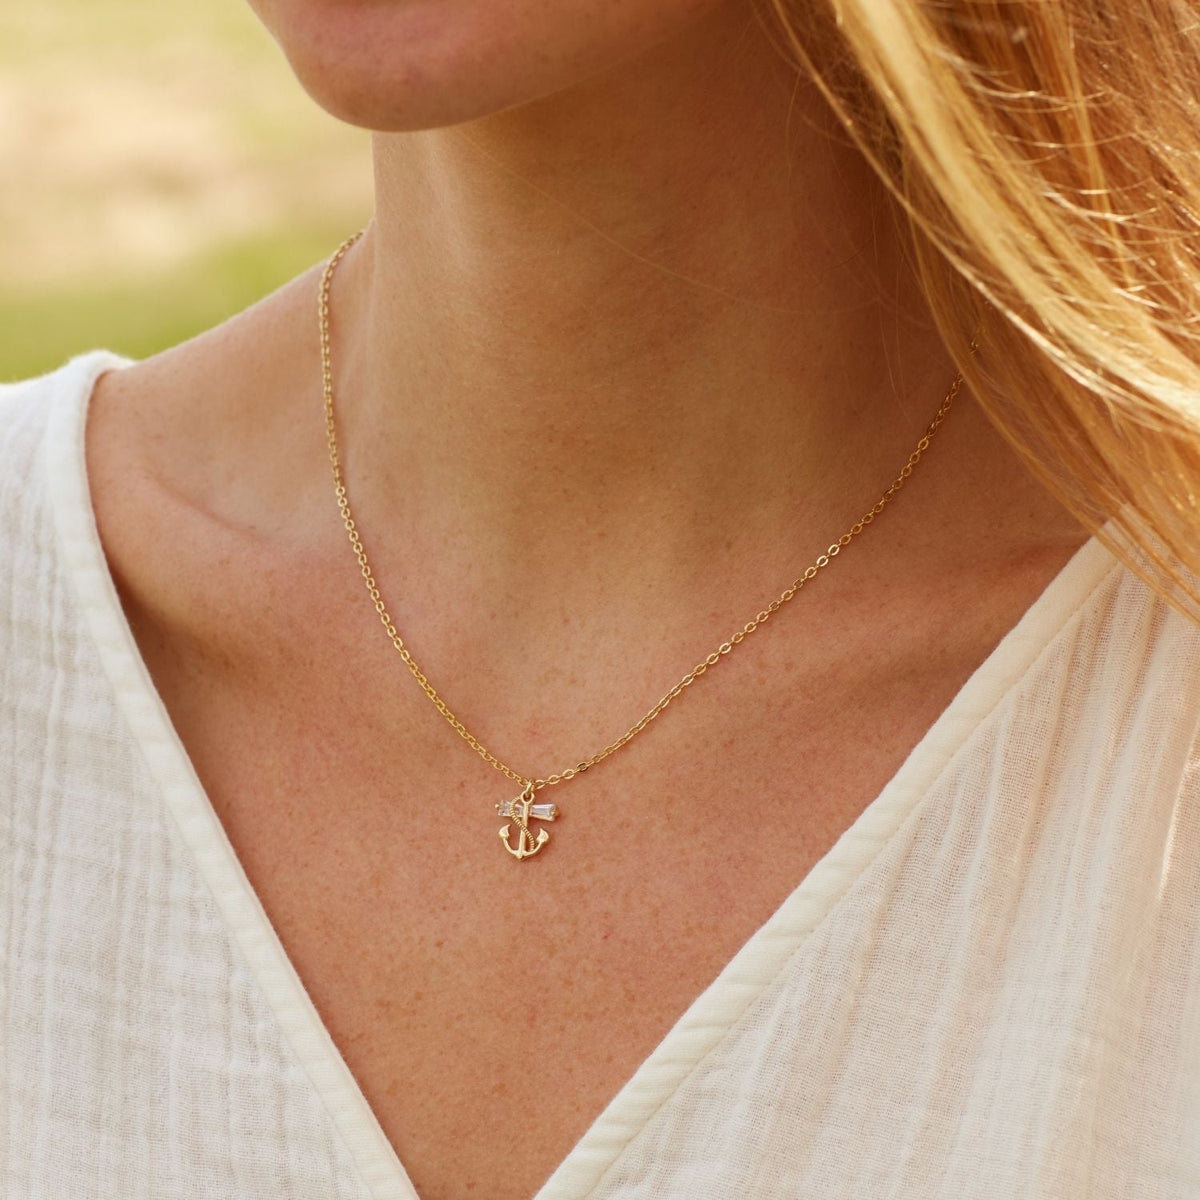 To My Best Friend | Guiding Light in the Darkness | Anchor Necklace